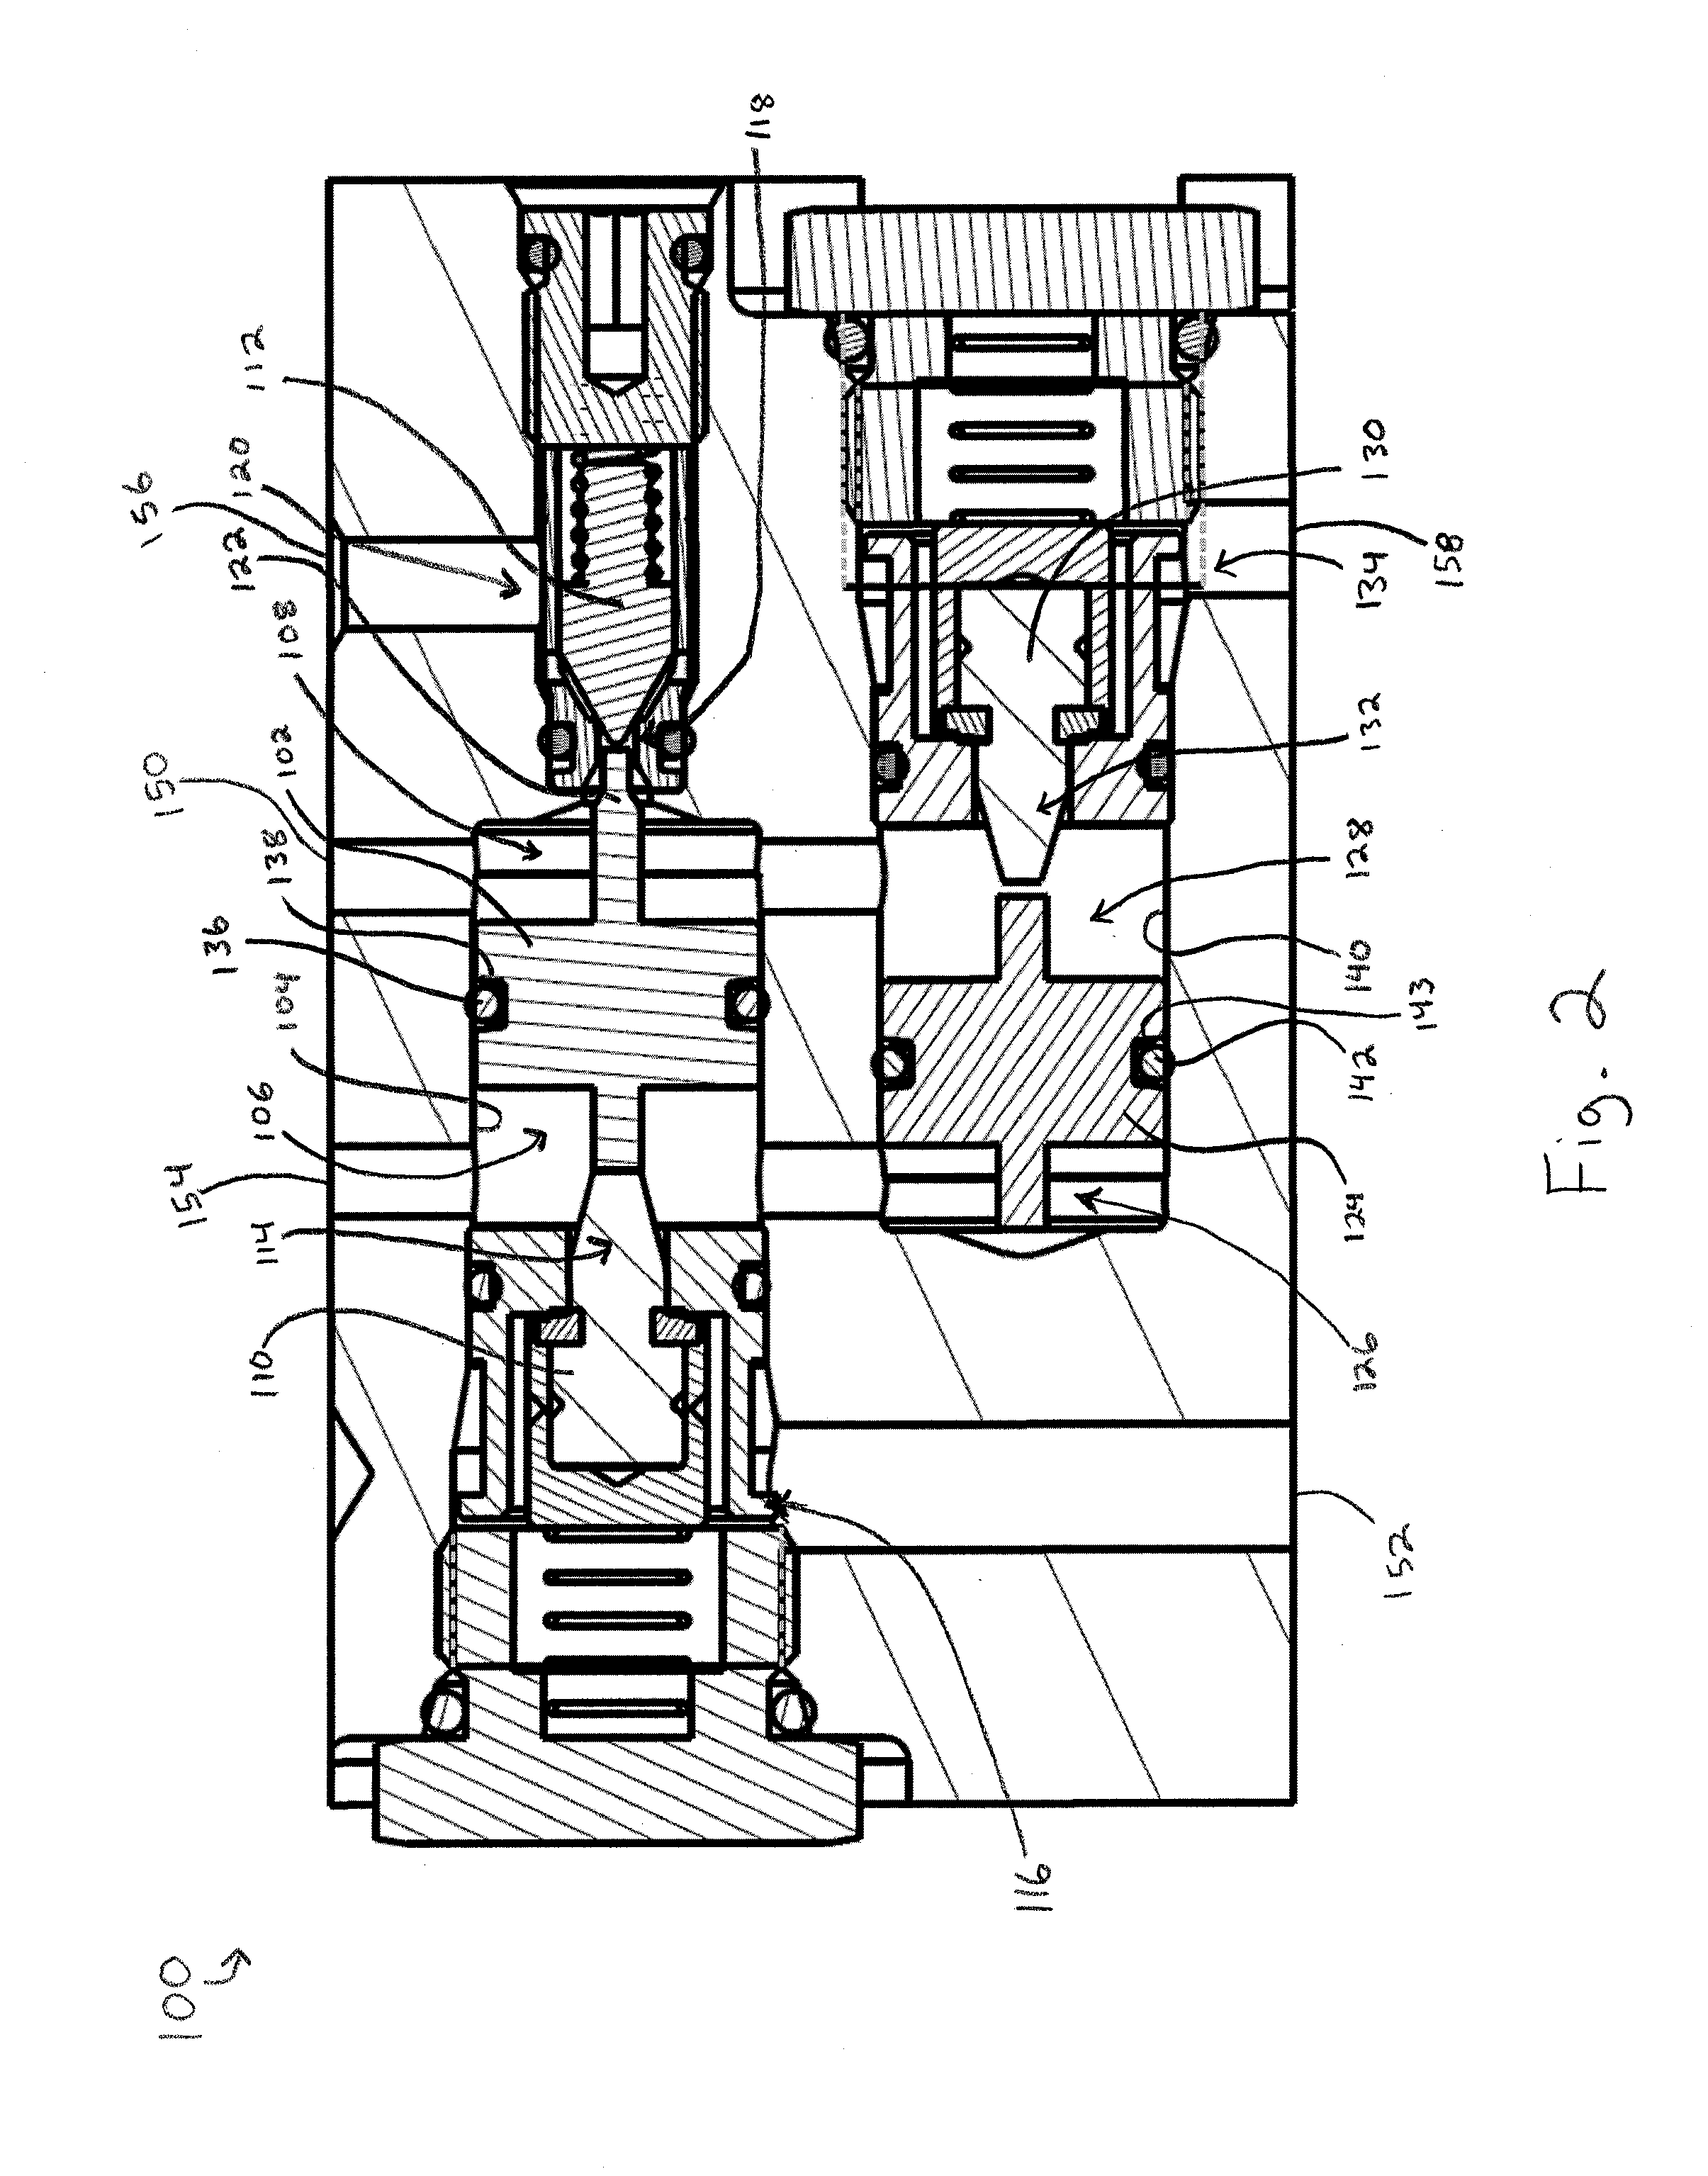 Electro-hydraulic pilot operated relief valve